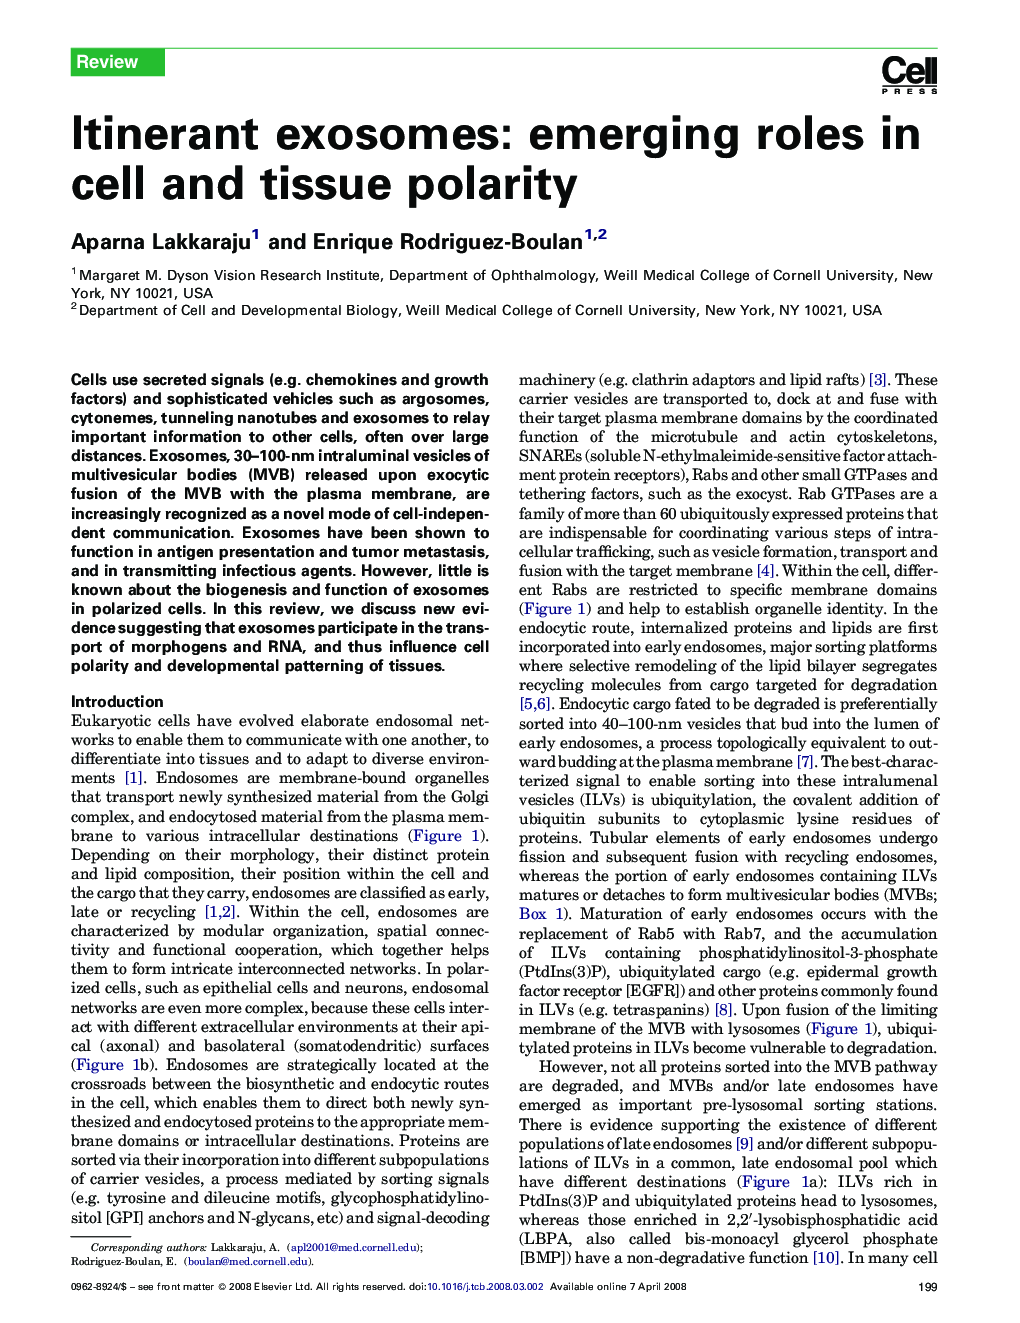 Itinerant exosomes: emerging roles in cell and tissue polarity